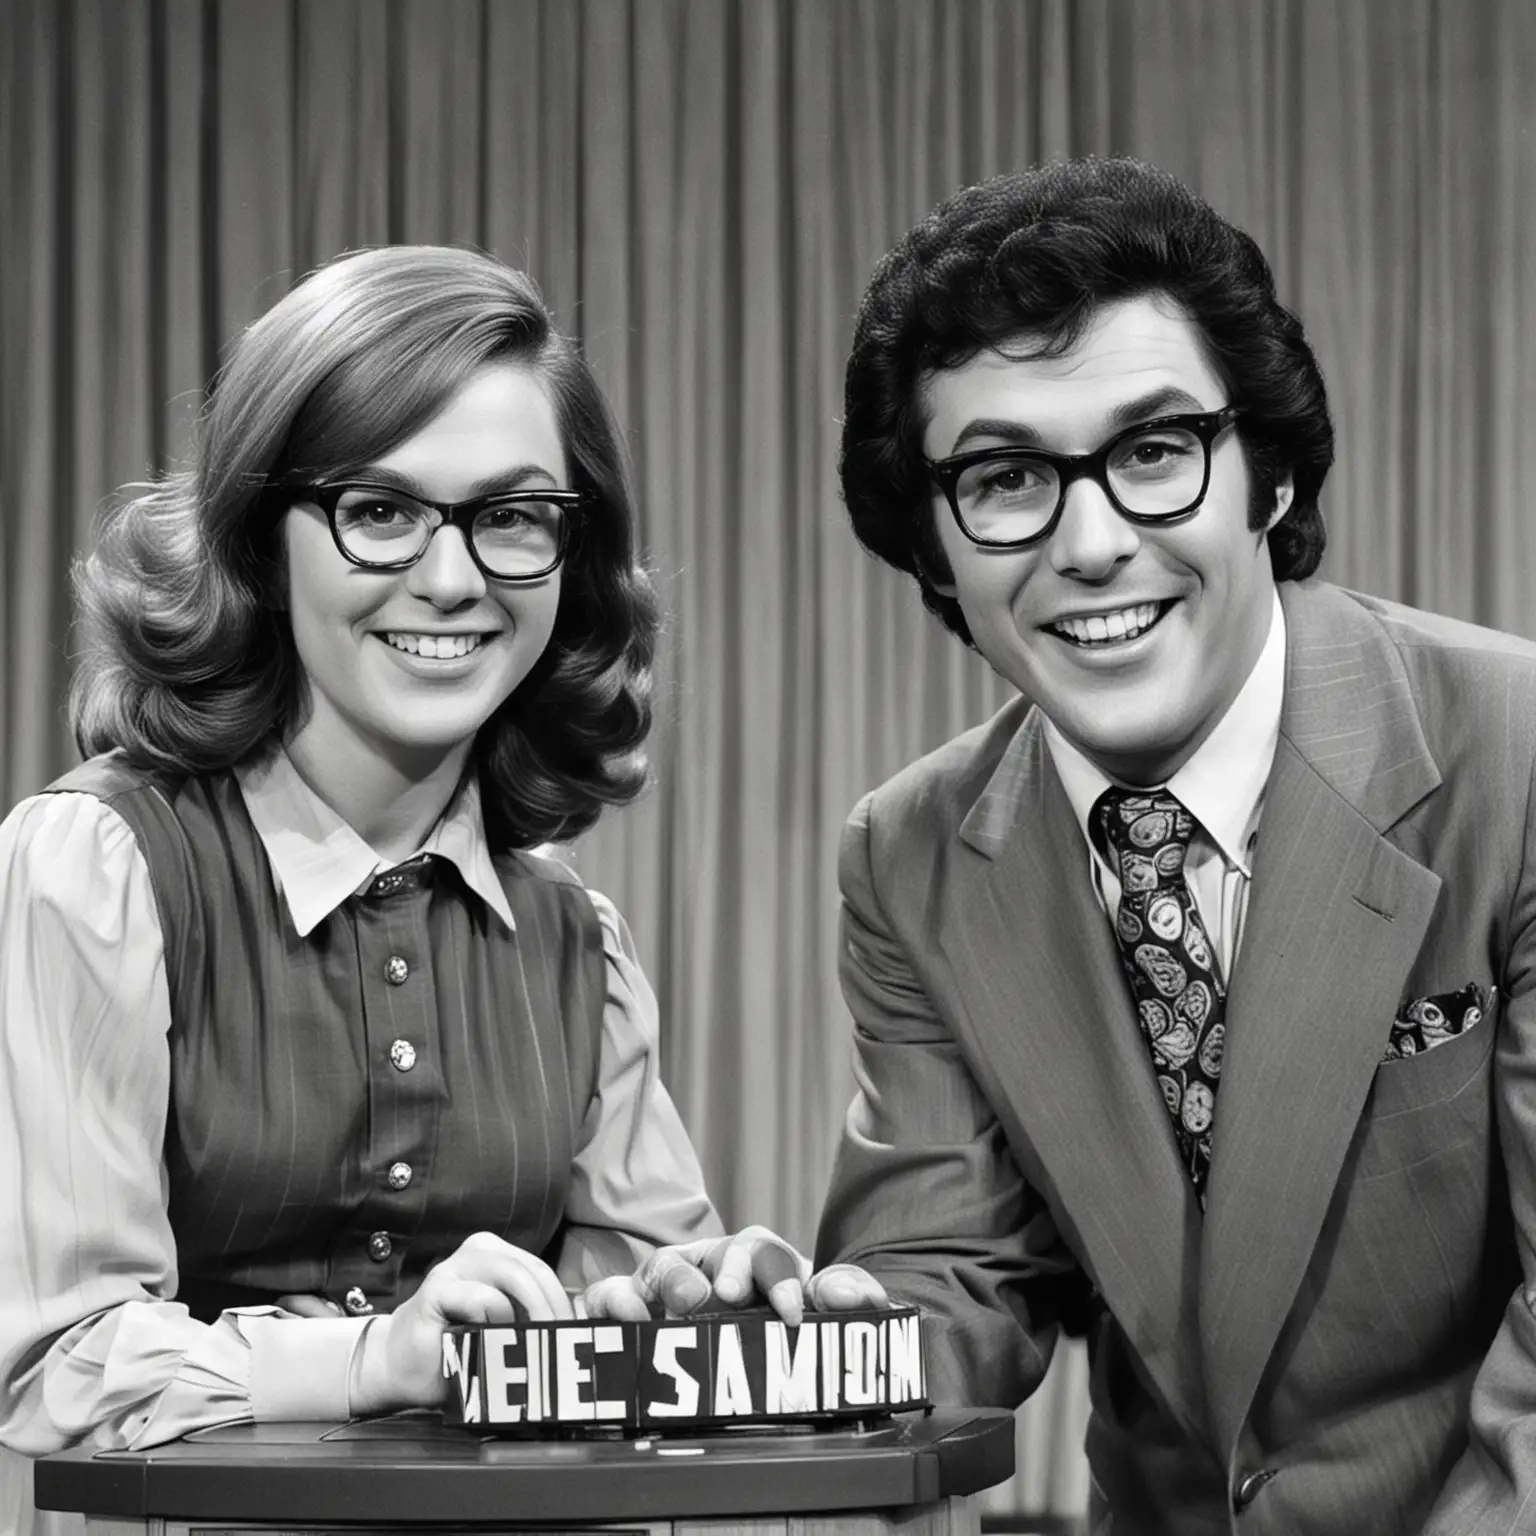 geeky man and woman winning game show from the 70s
